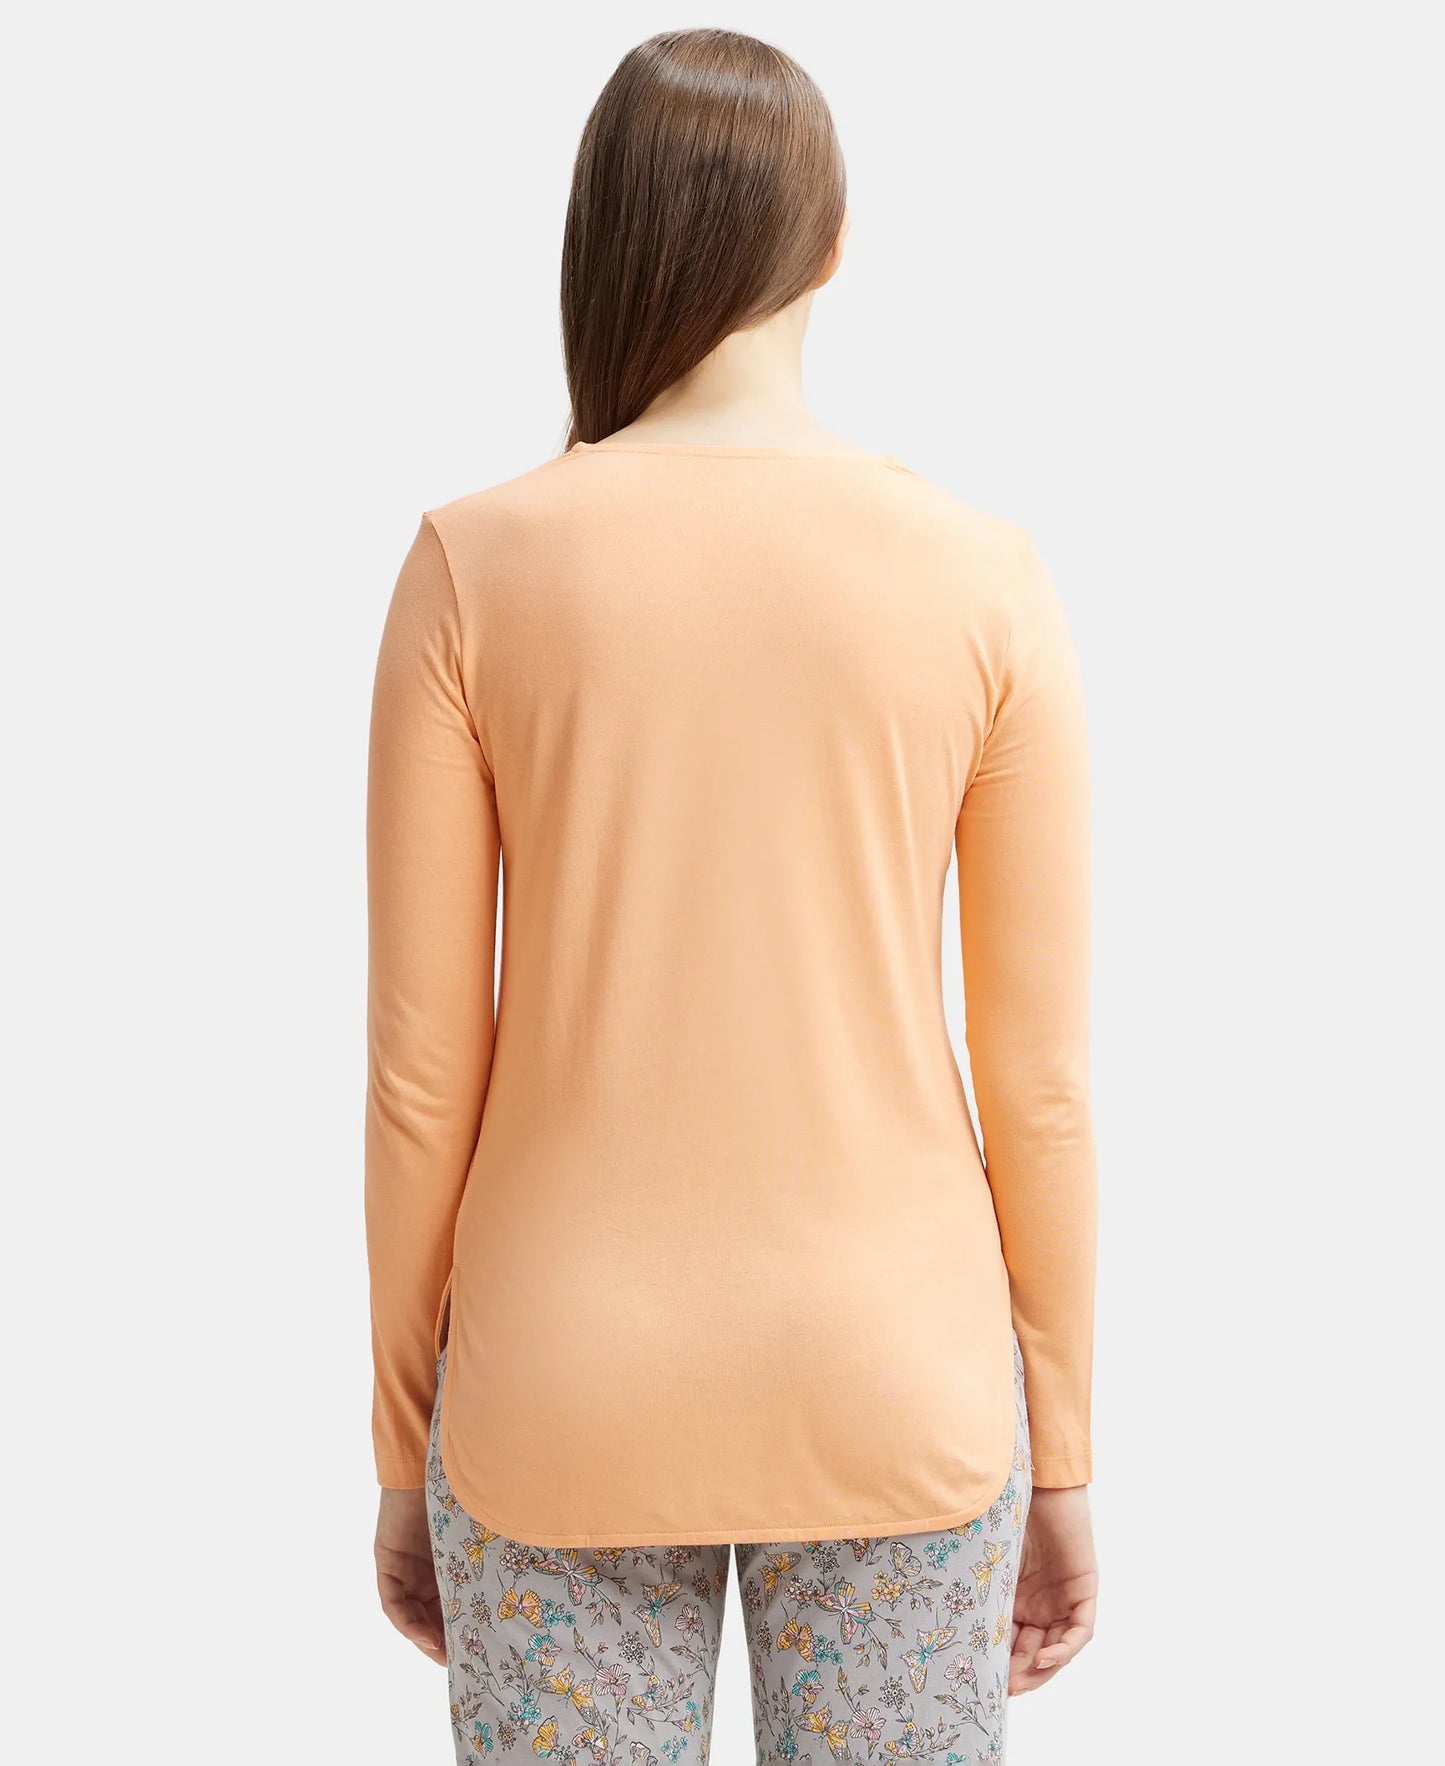 Micro Modal Cotton Relaxed Fit Solid Round Neck Full Sleeve T-Shirt with Curved Hem Styling - Coral Reef-3